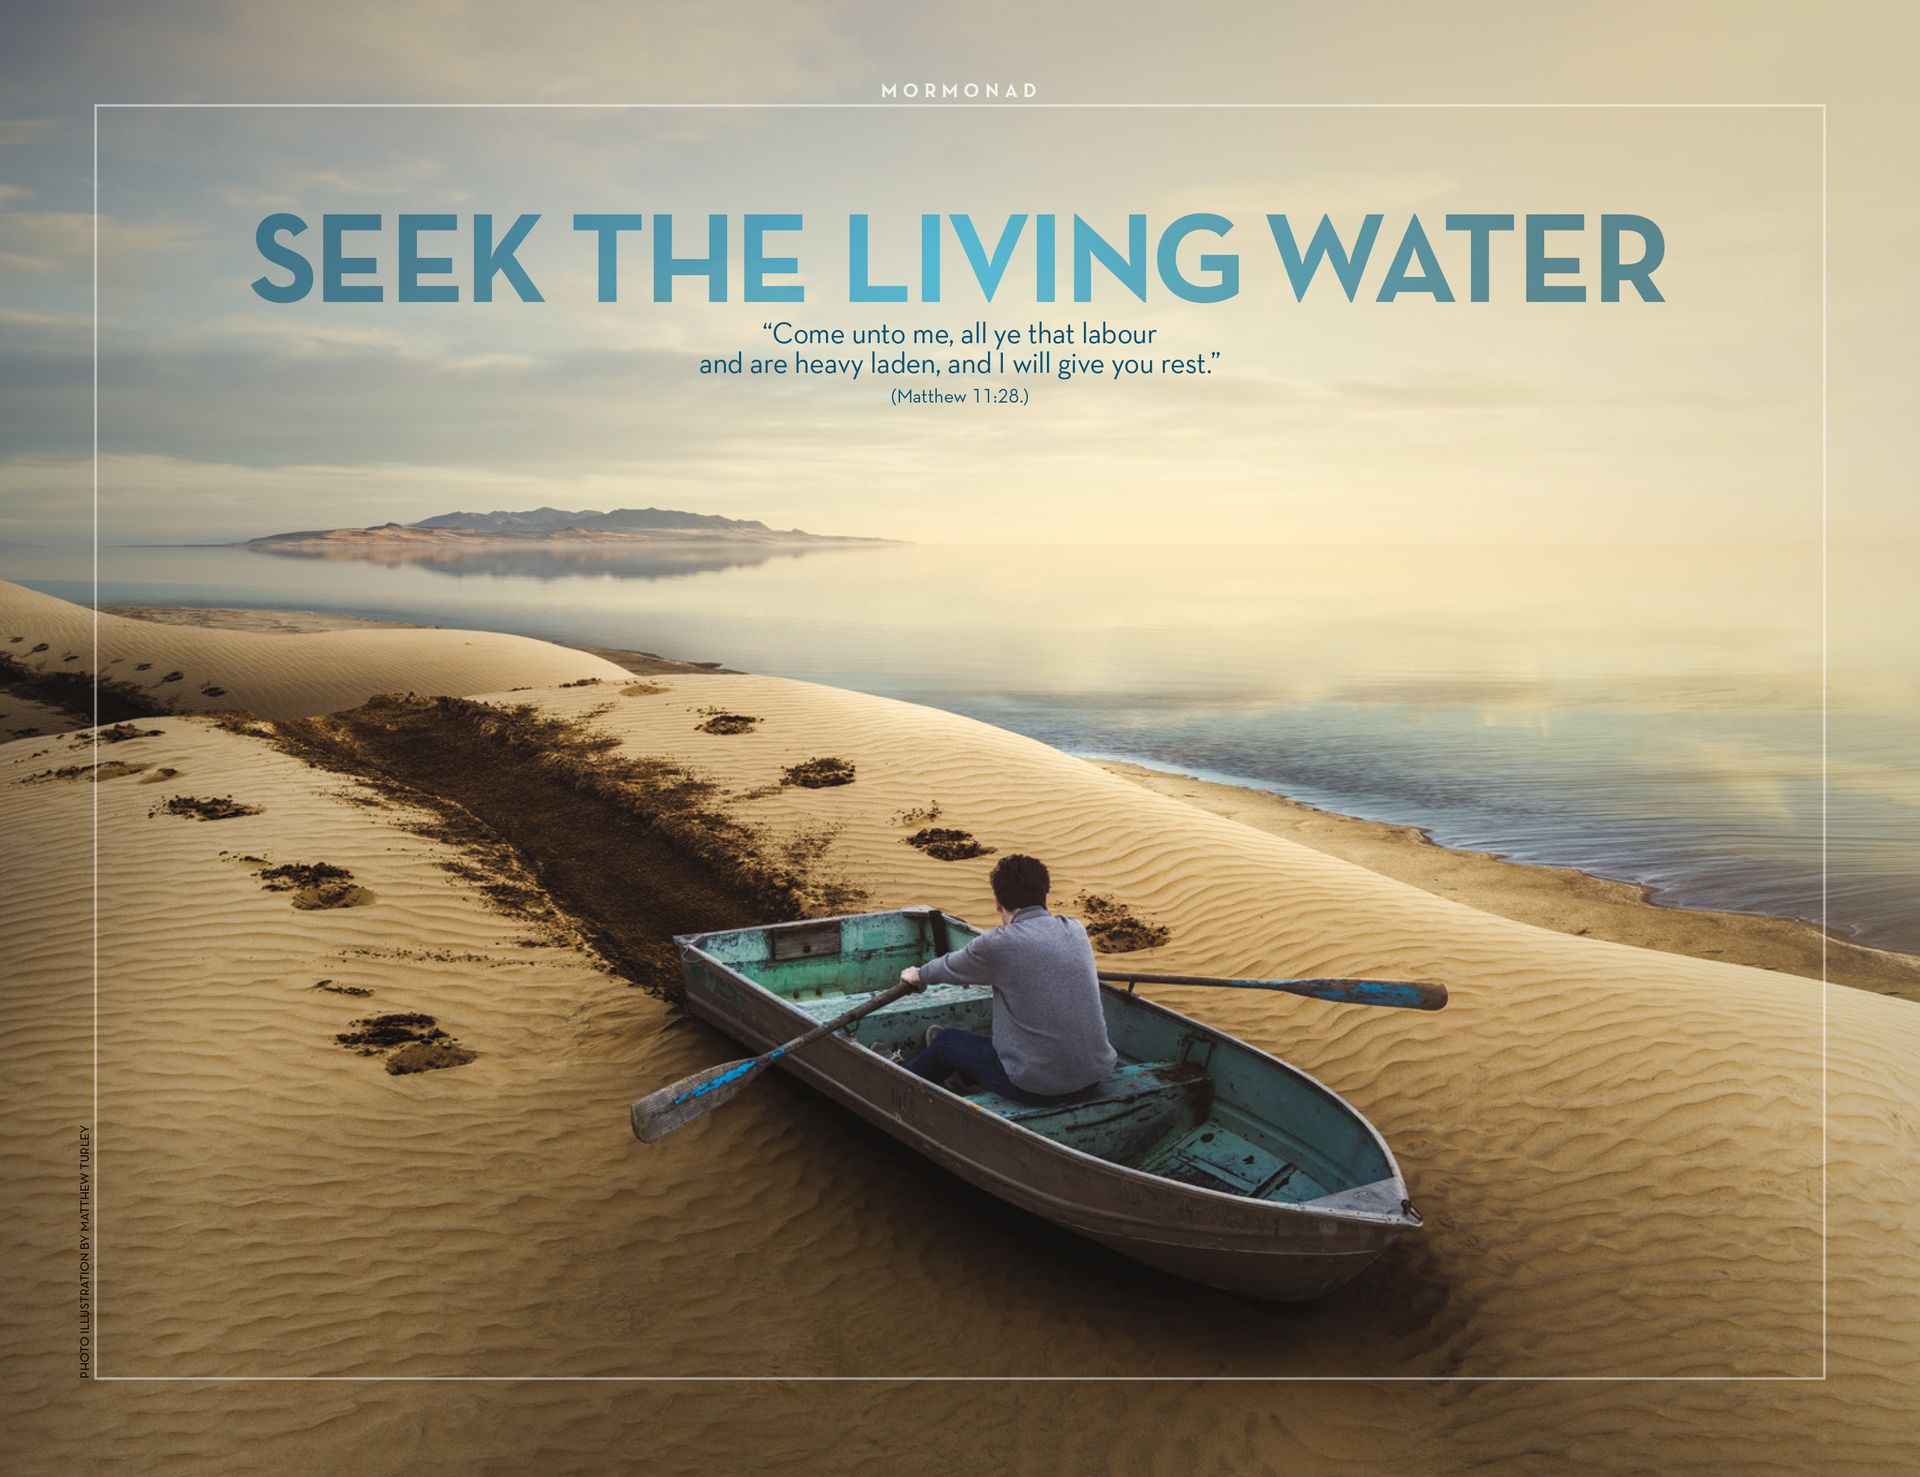 Seek the Living Water. “Come unto me, all ye that labour and are heavy laden, and I will give you rest.” (Matthew 11:28.) Sept. 2015 © undefined ipCode 1.